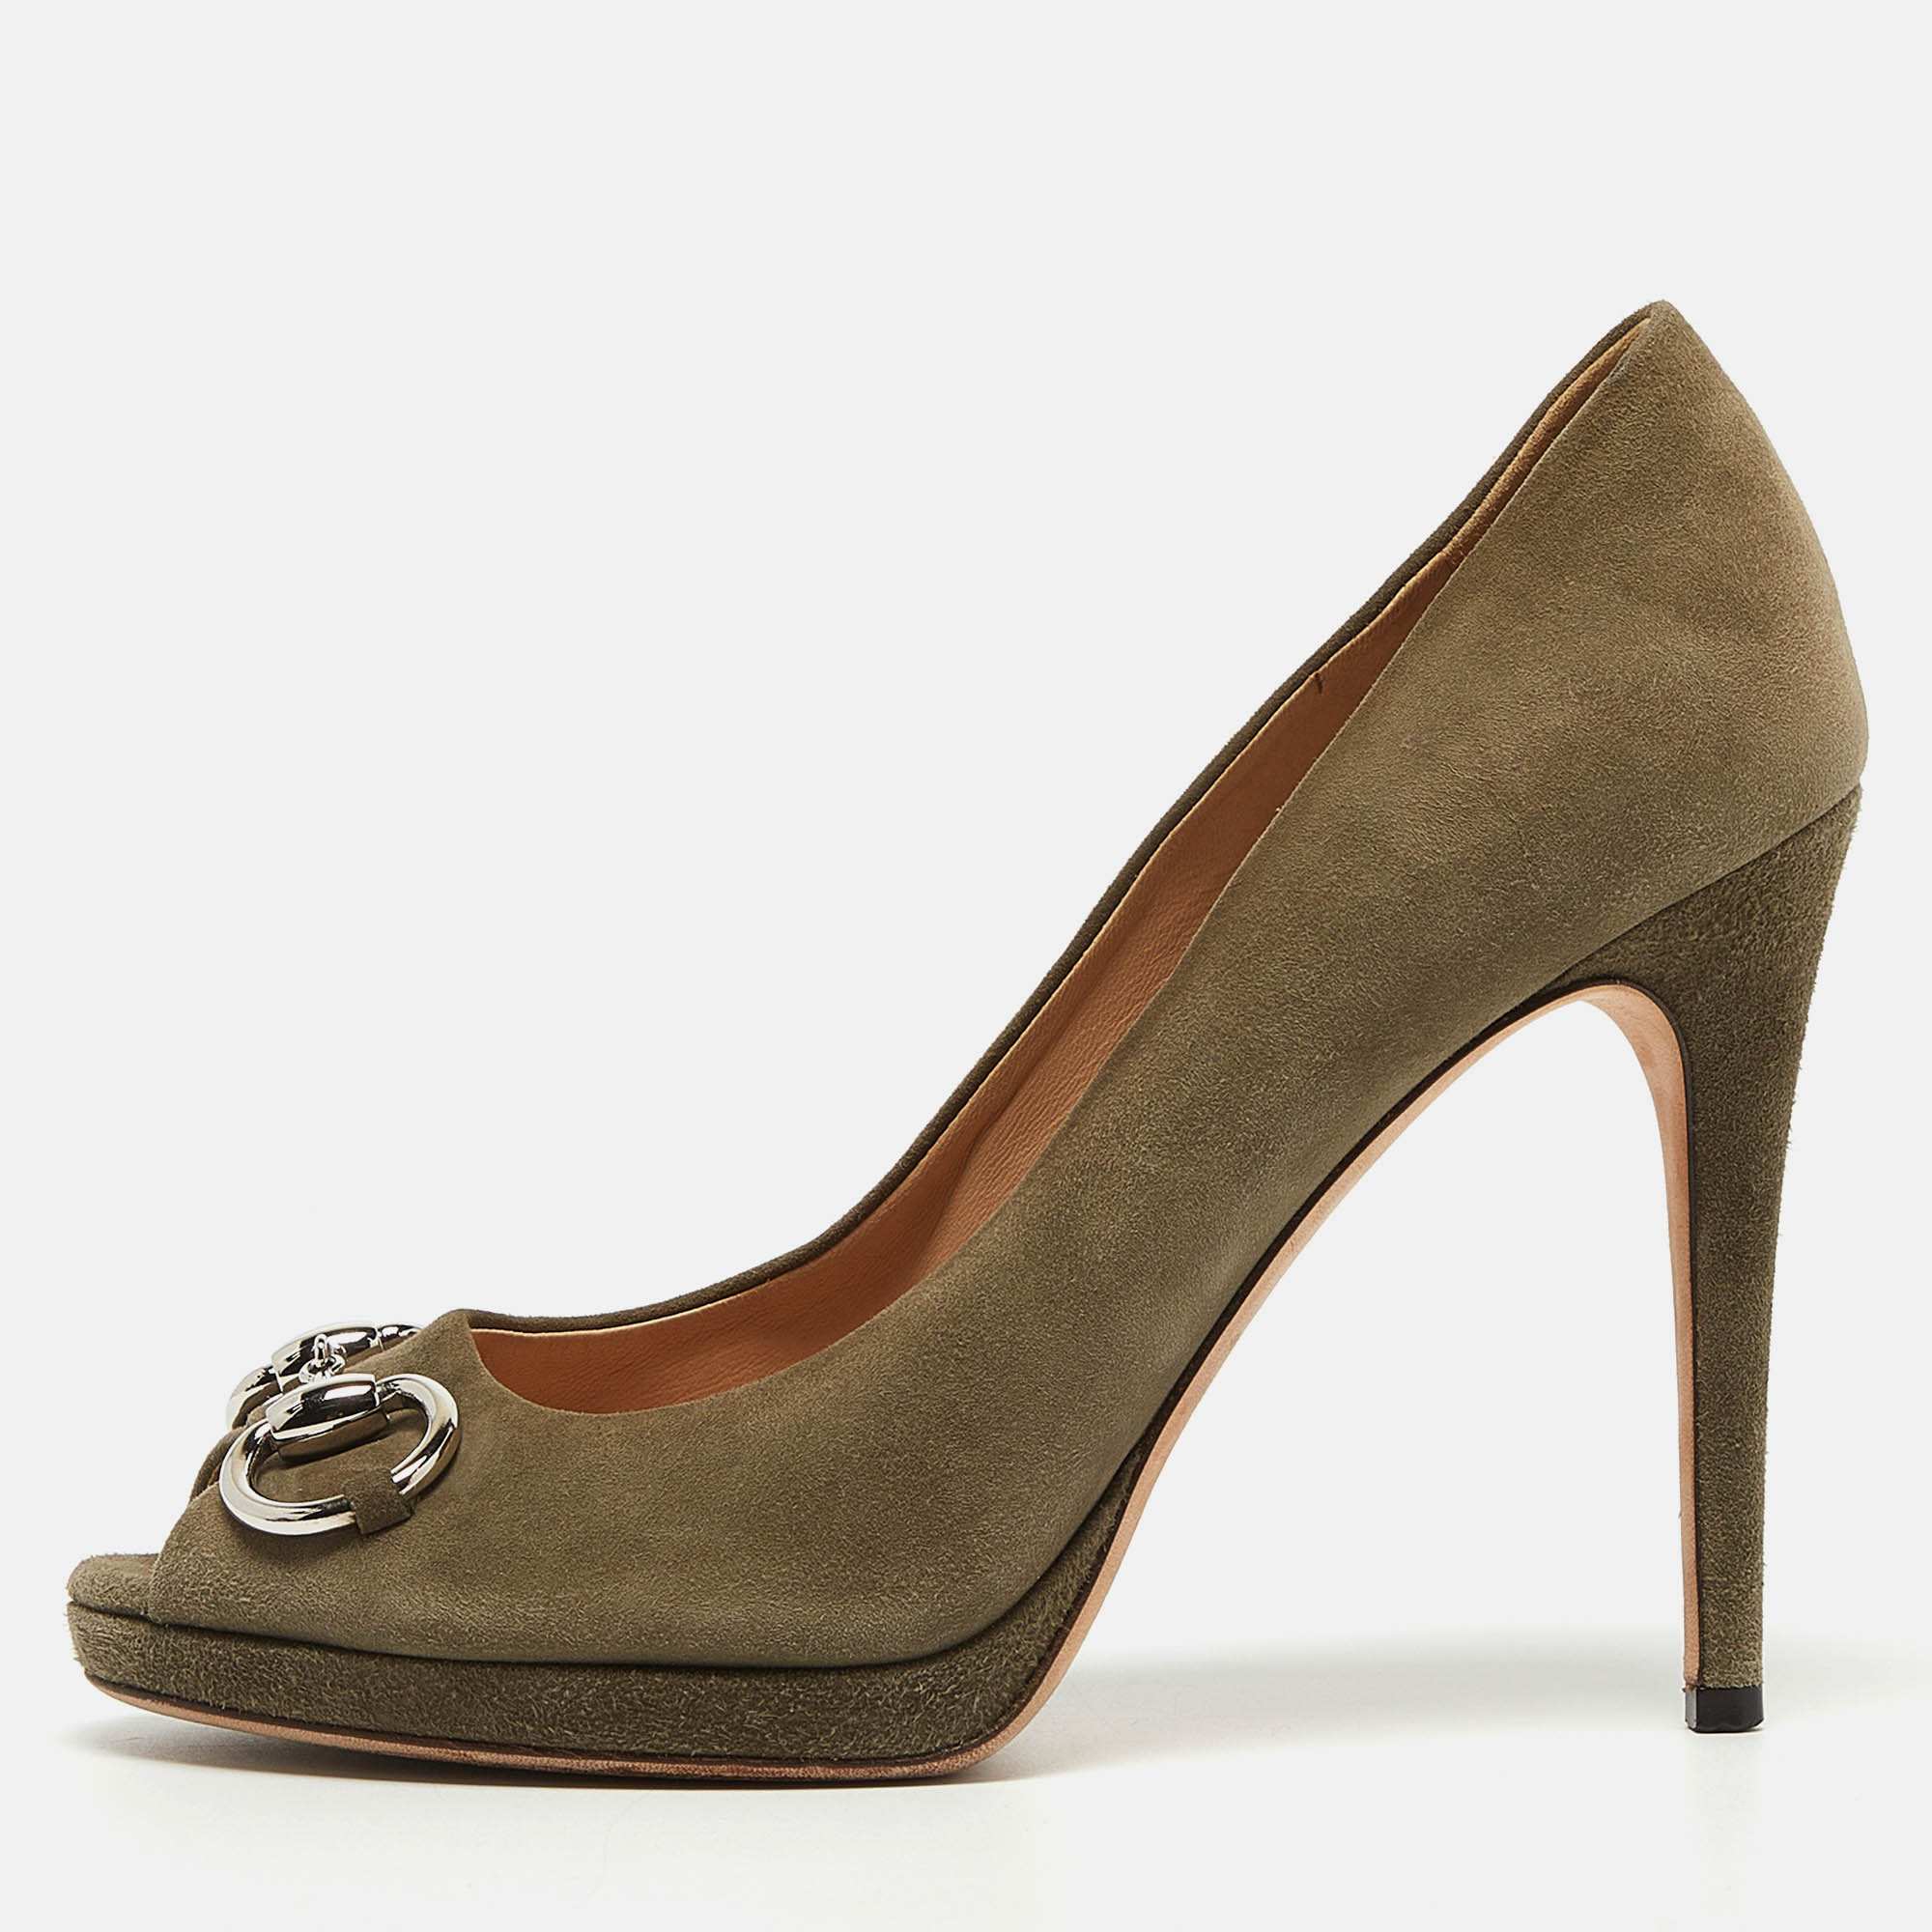 Gucci olive green suede new hollywood pumps size 37.5